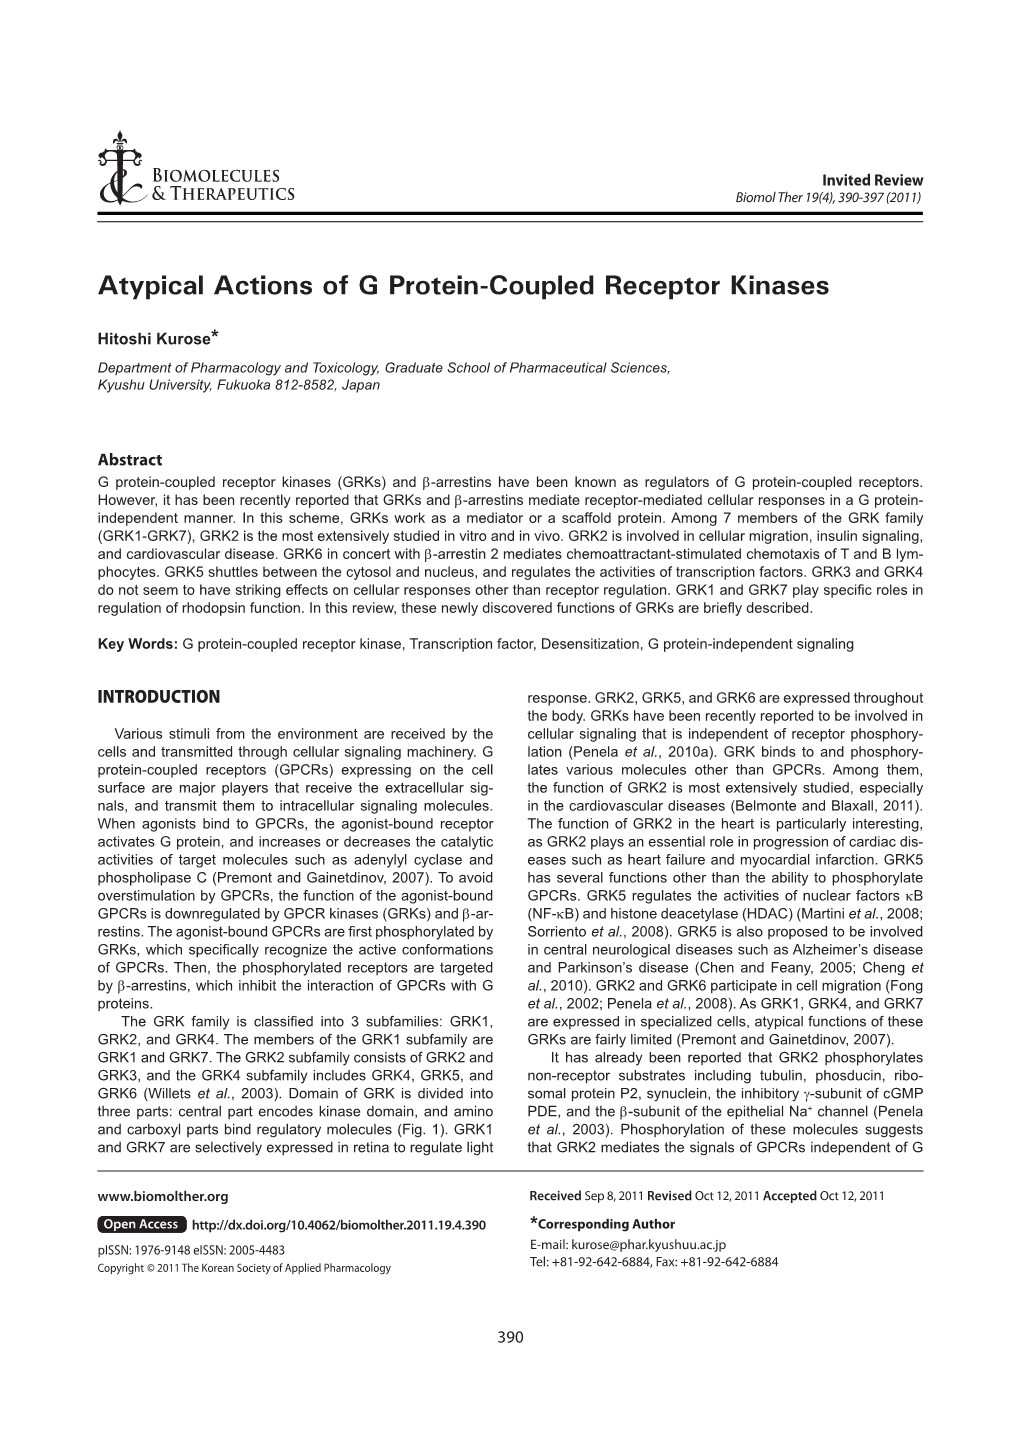 Atypical Actions of G Protein-Coupled Receptor Kinases